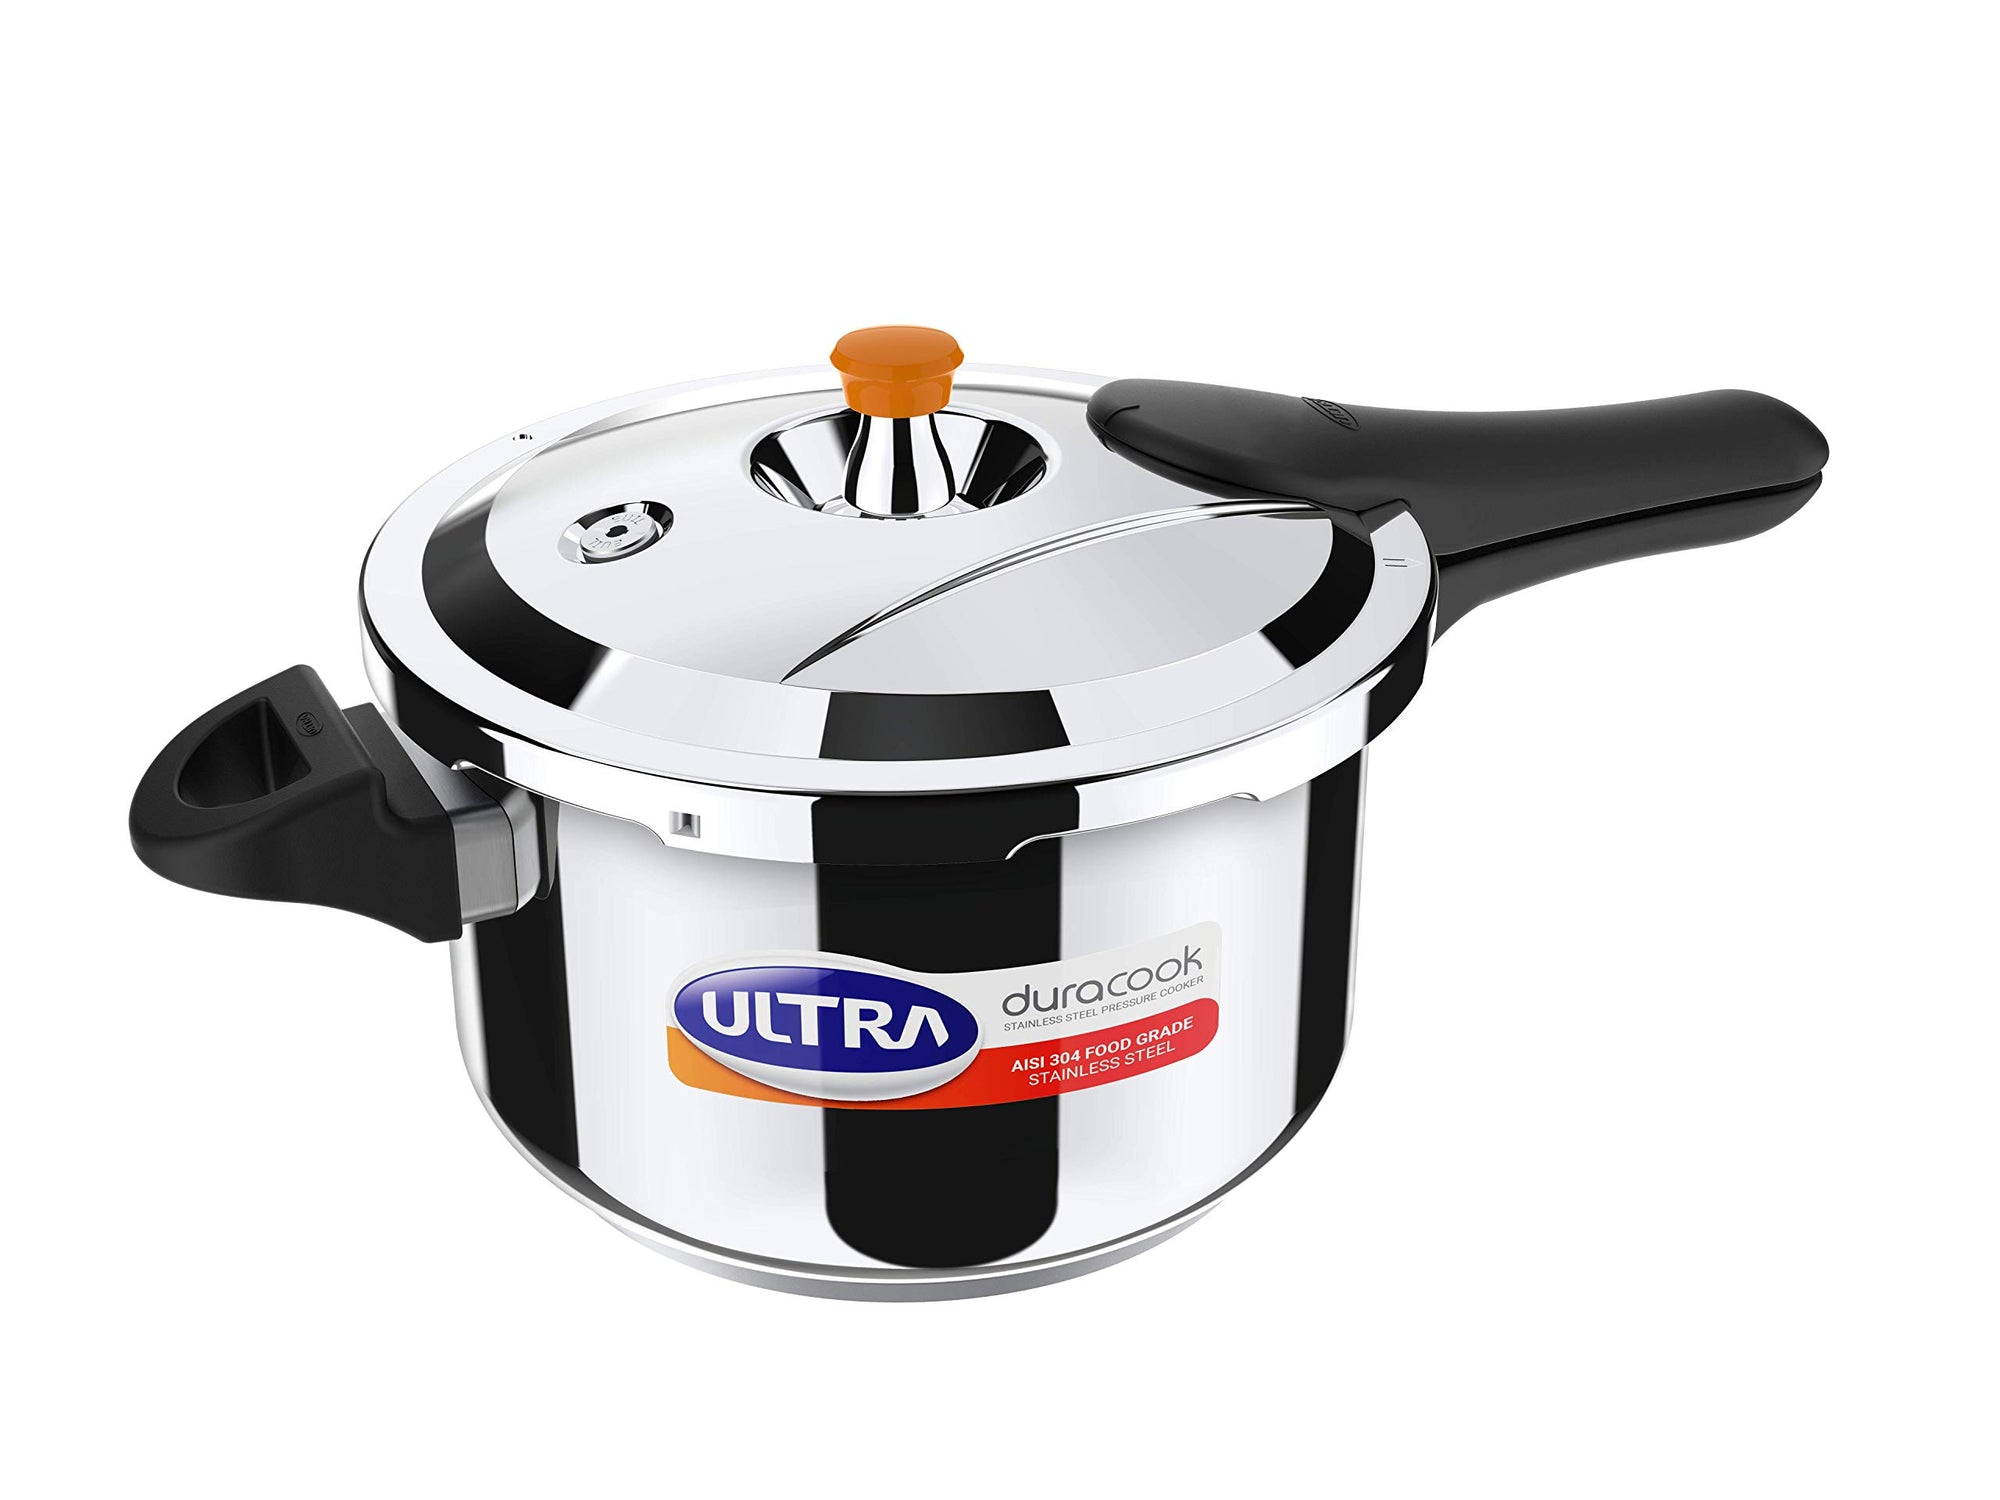 Ultra Duracook Stainless Steel Outer Lid Pressure Cooker, 5.5 liter